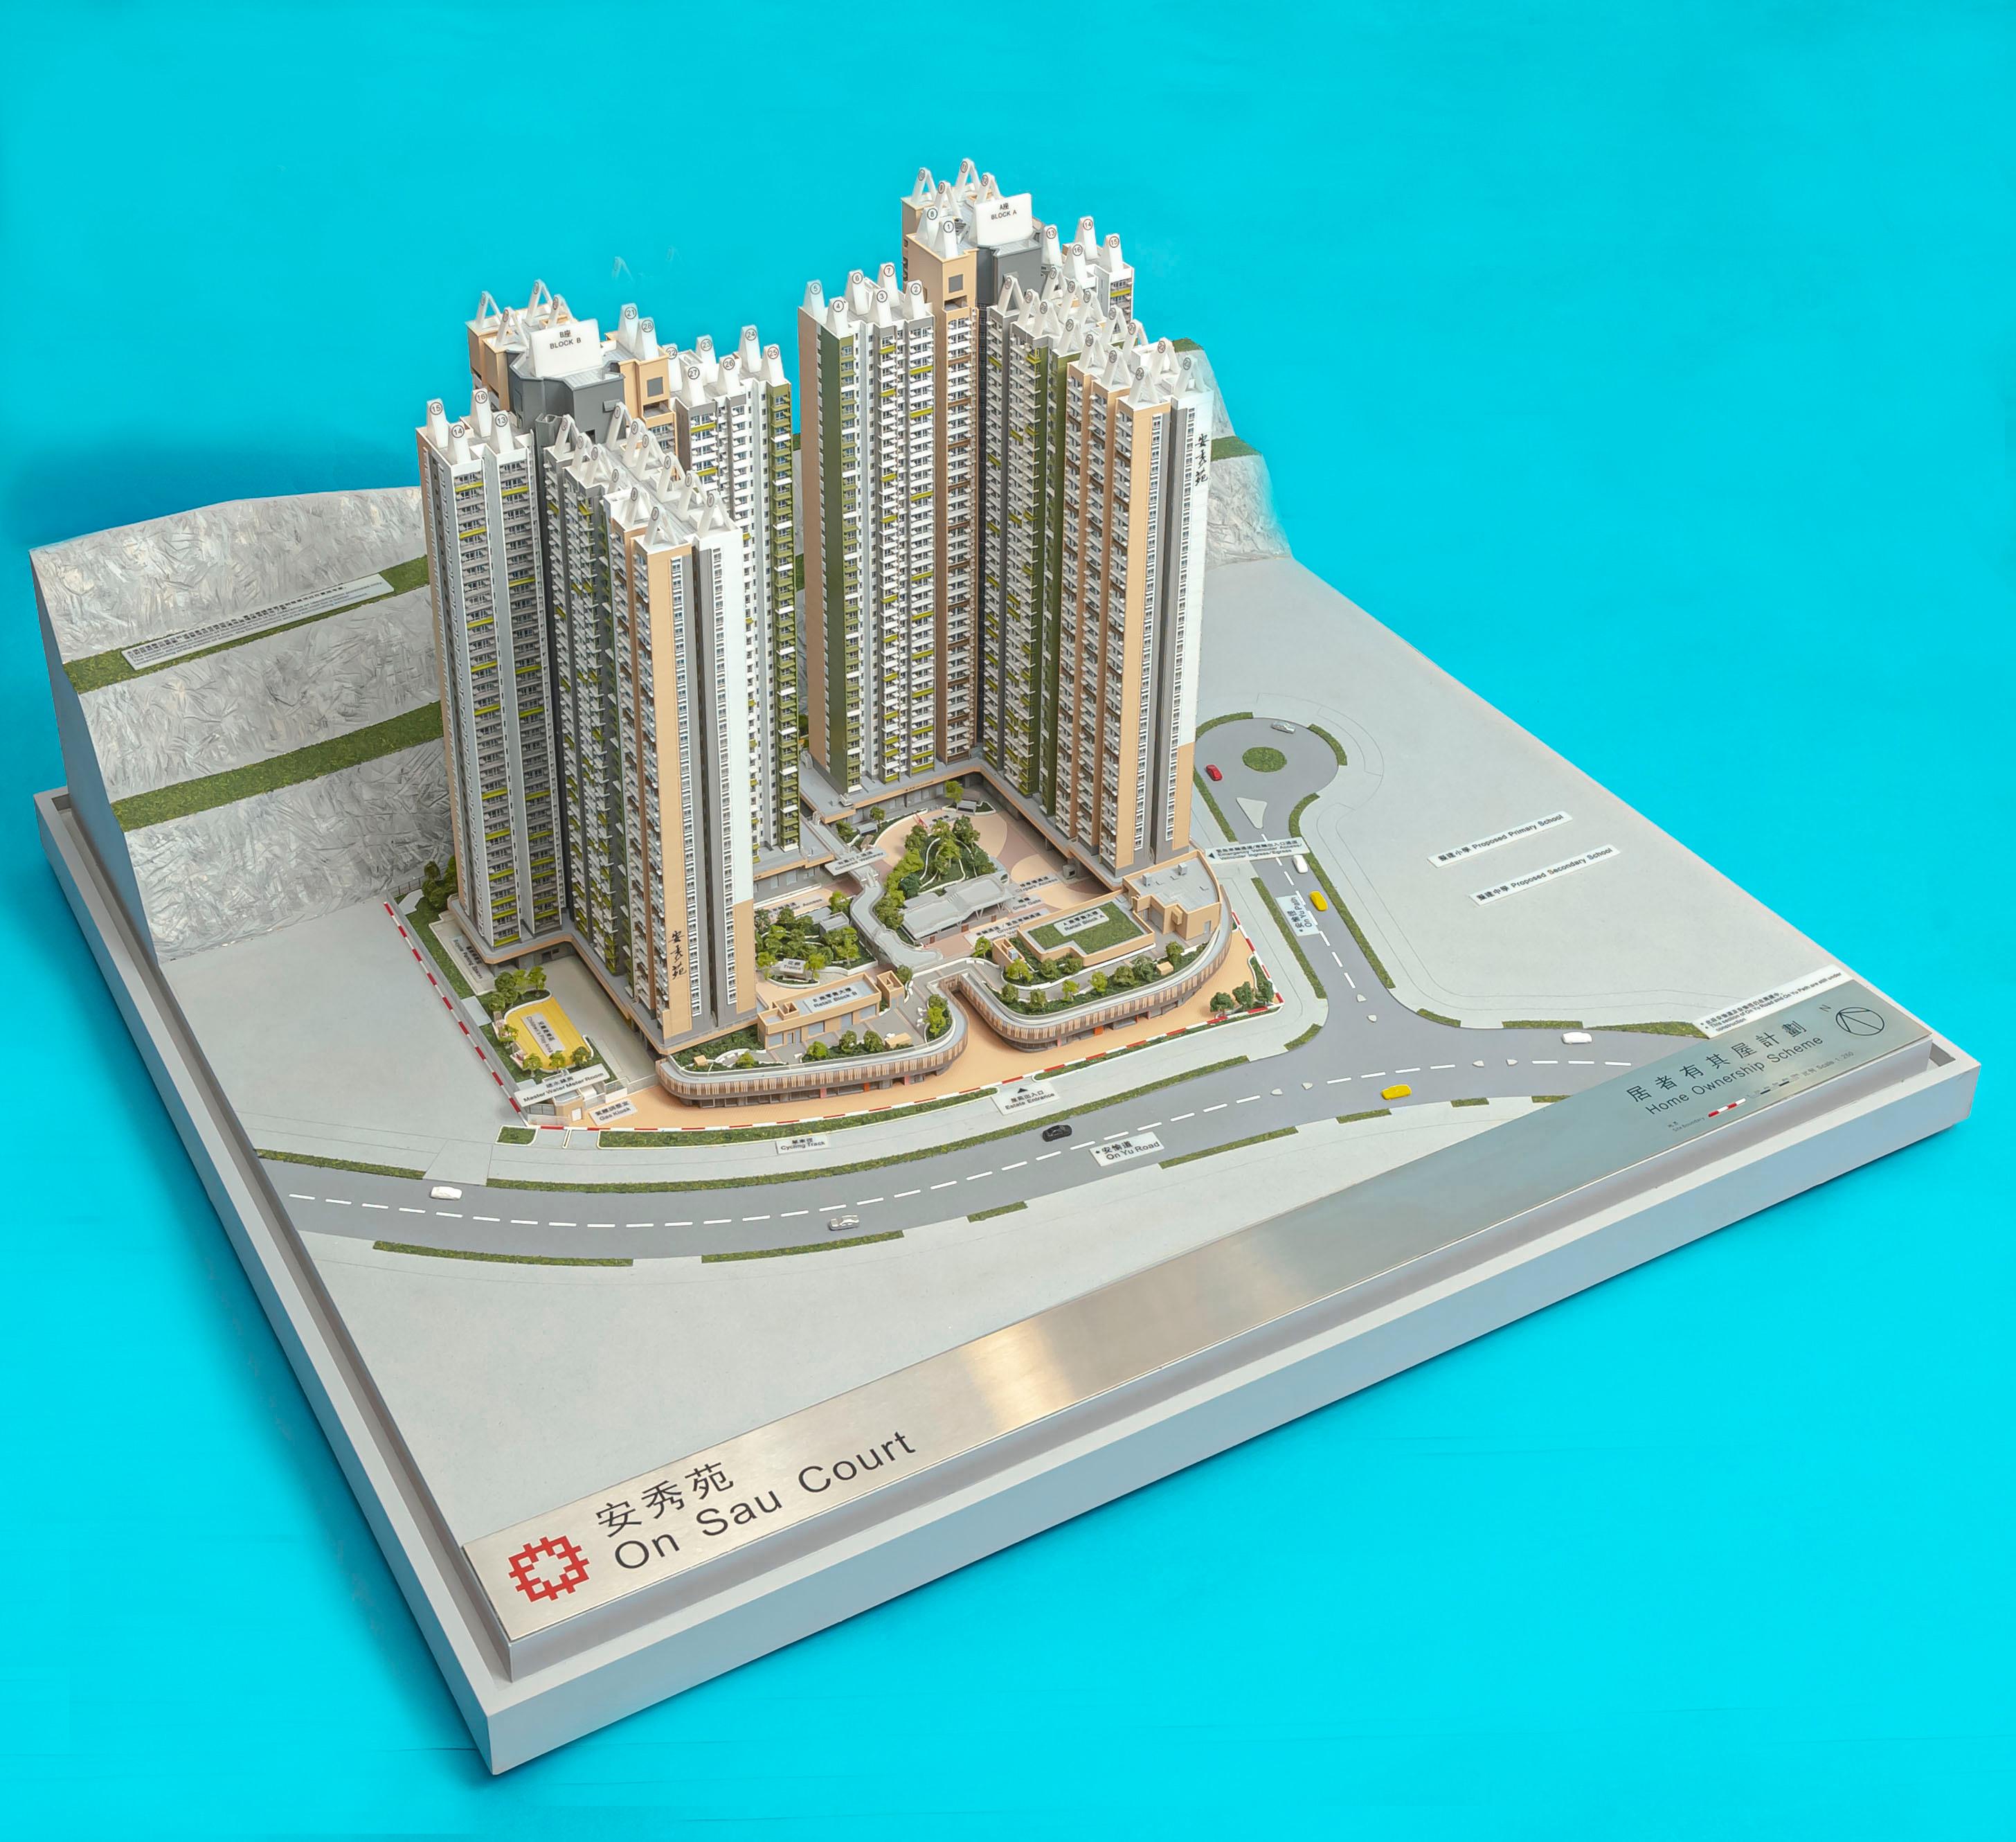 Applications for purchase under Sale of Home Ownership Scheme Flats 2022 will start on February 25. Photo shows a model of On Sau Court, which is a development project under the scheme.
